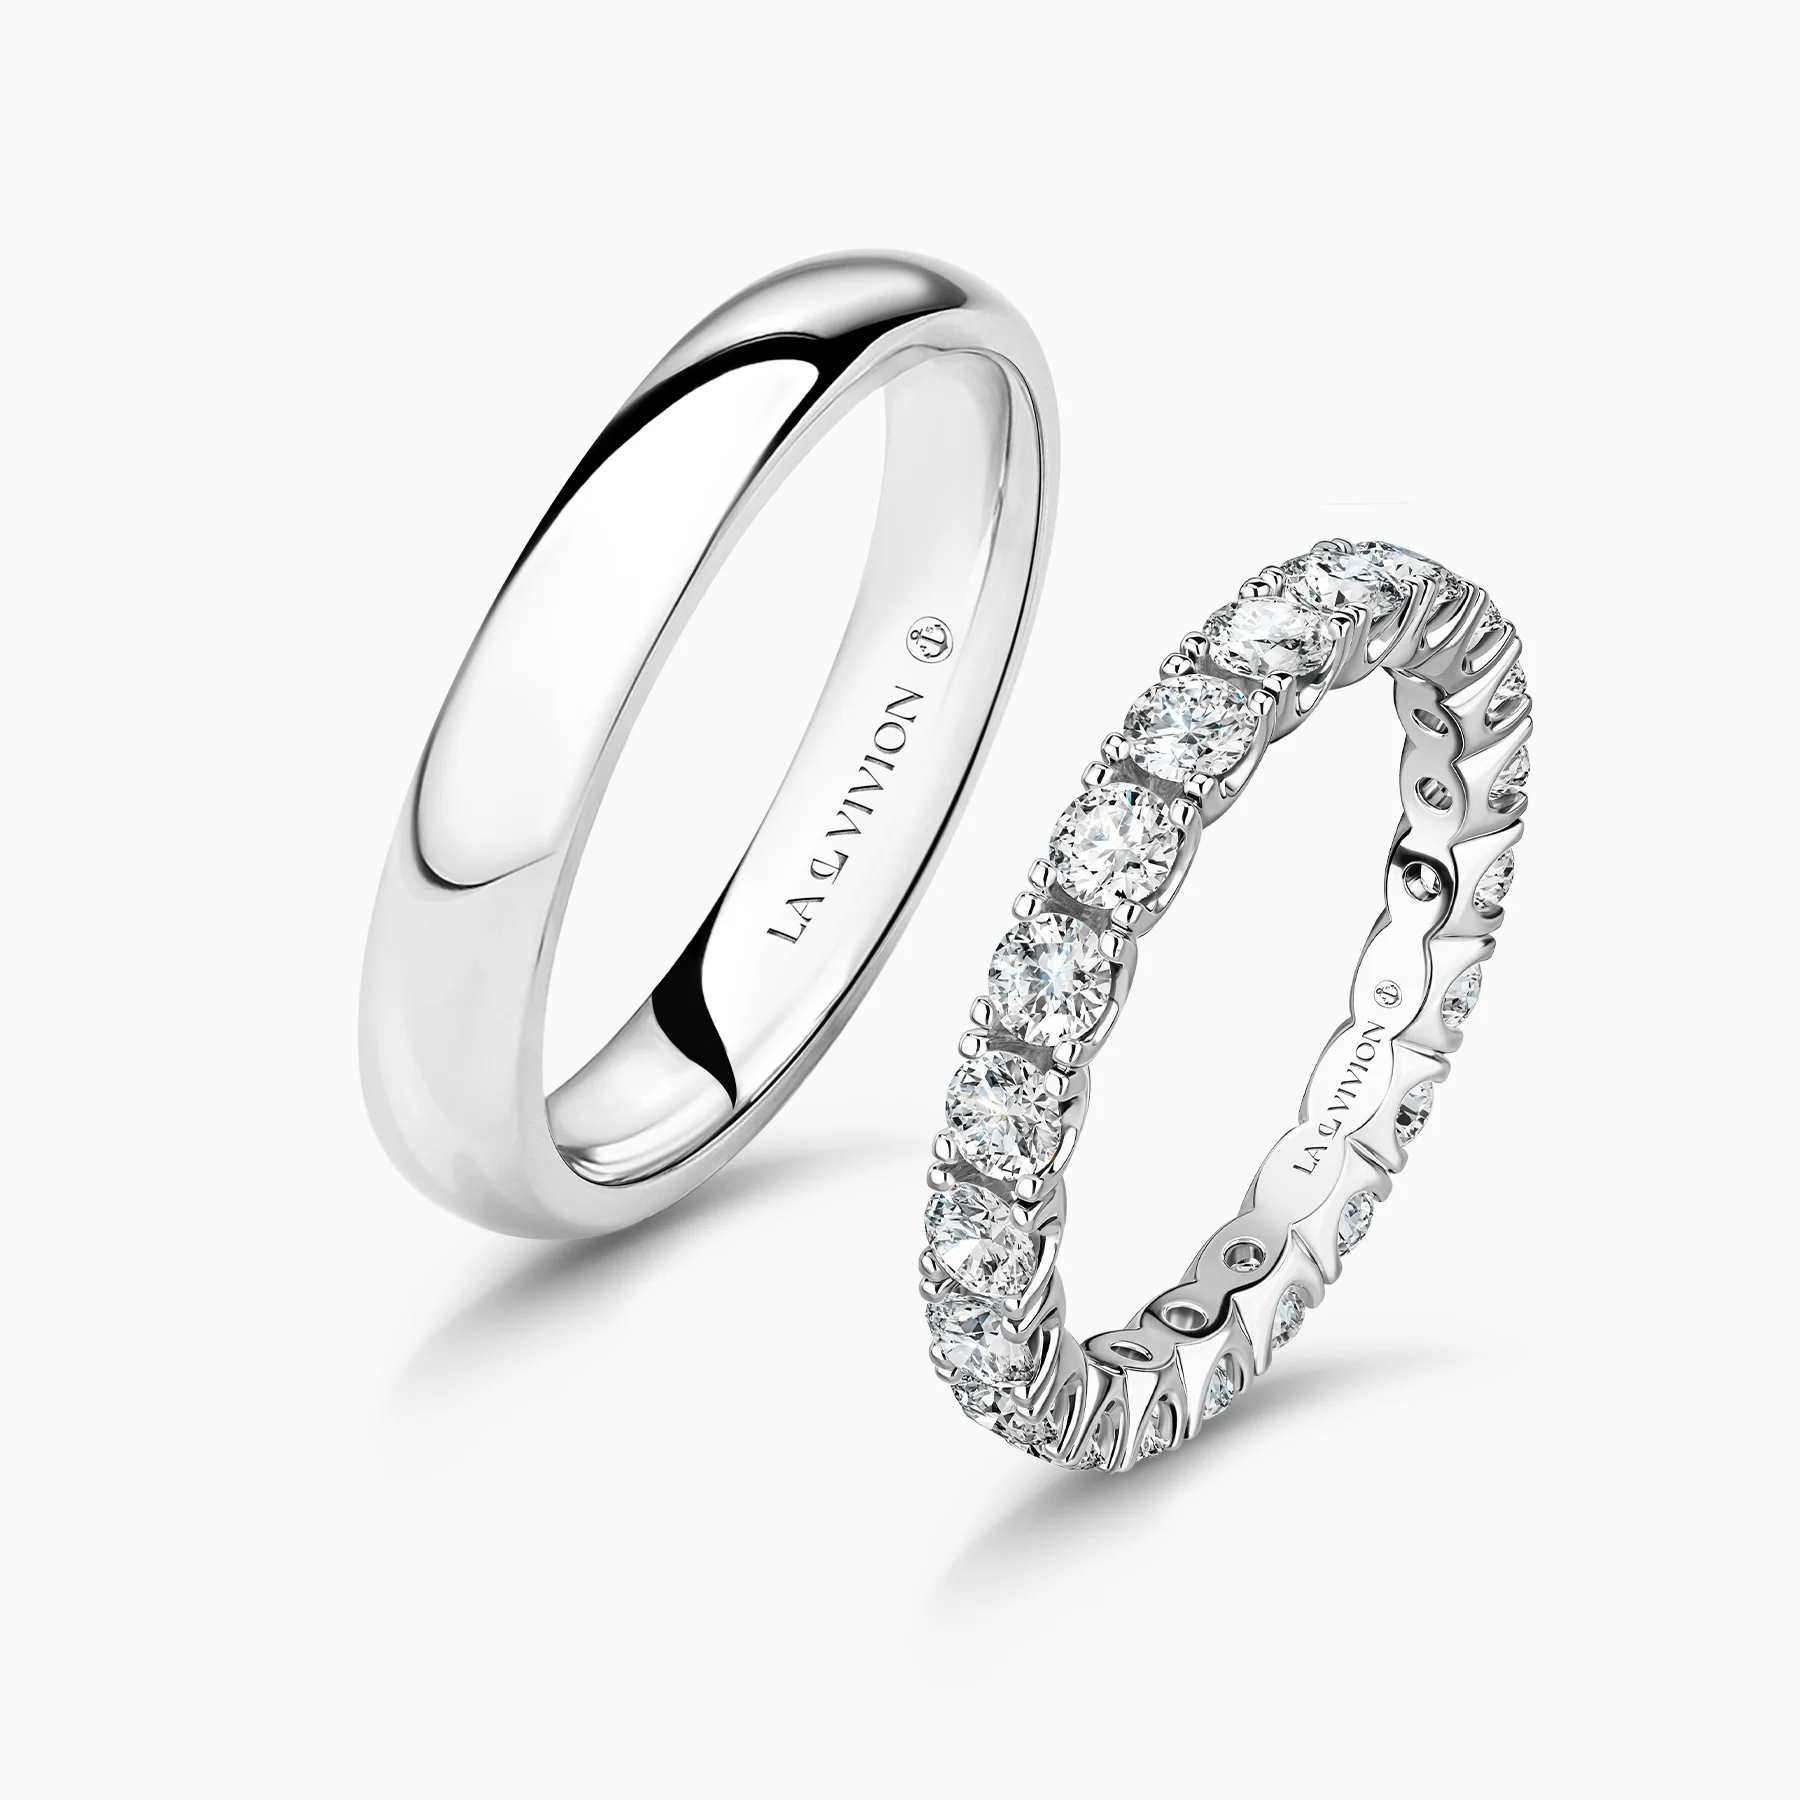  Duo Infinité 1.6 ct